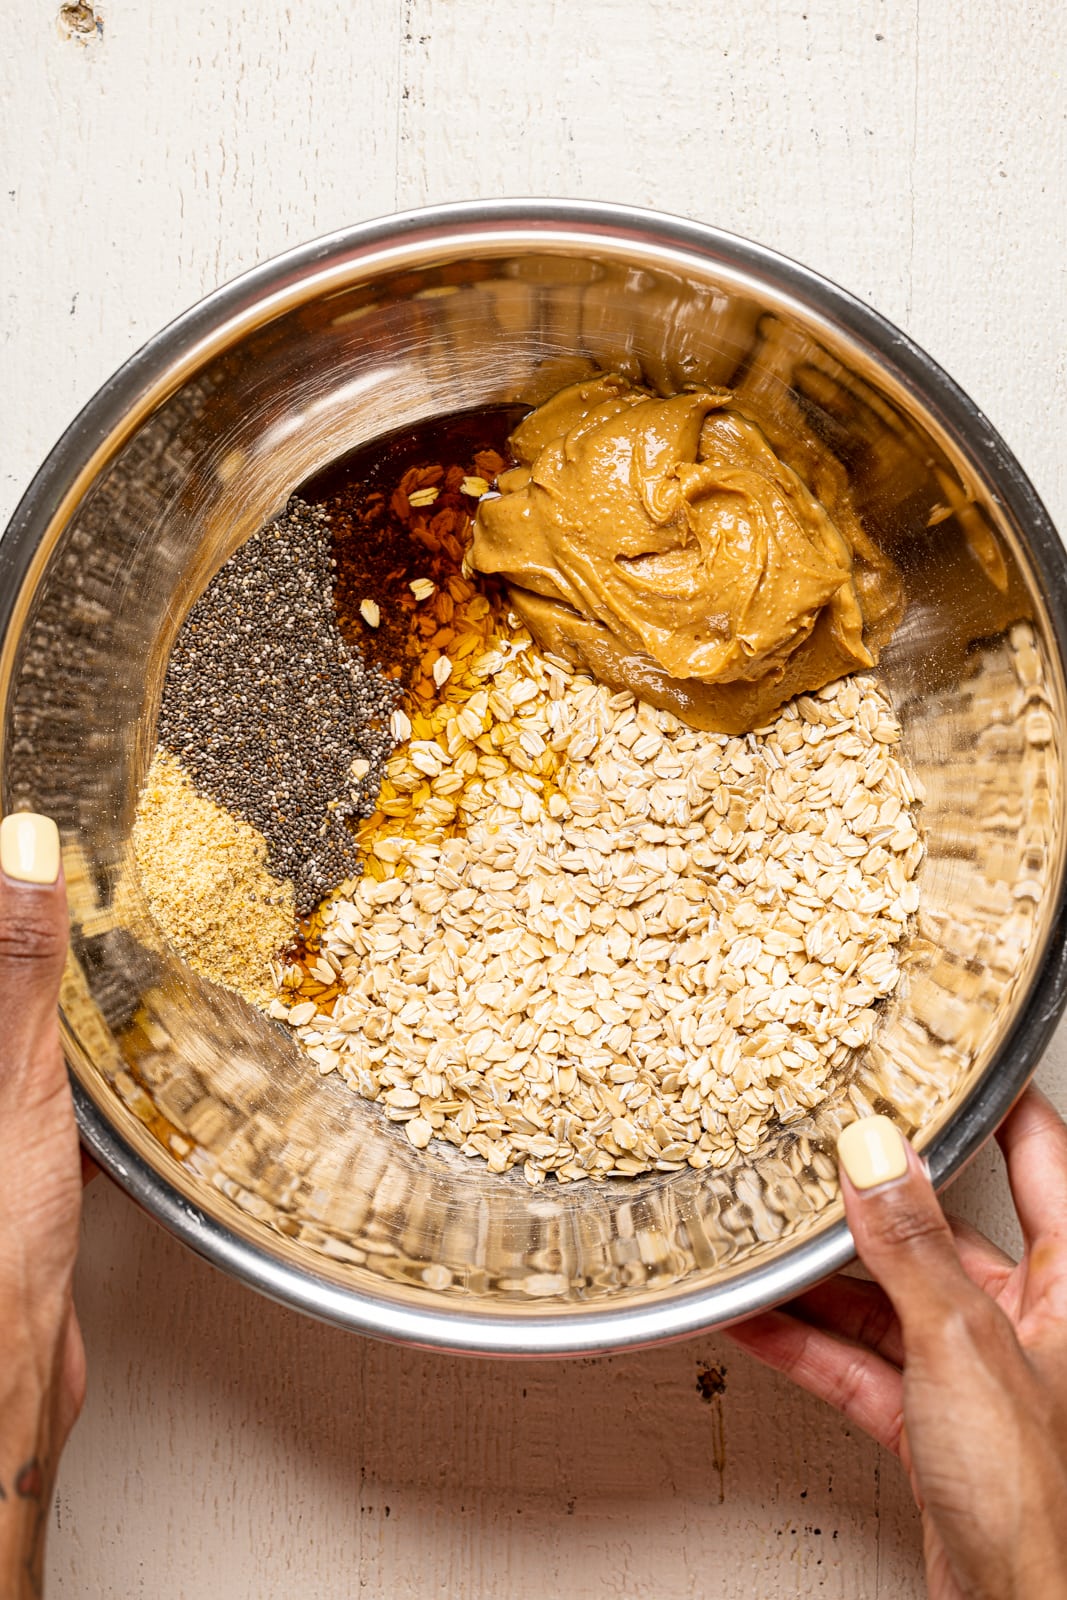 All ingredients for protein balls in a large silver bowl being held.